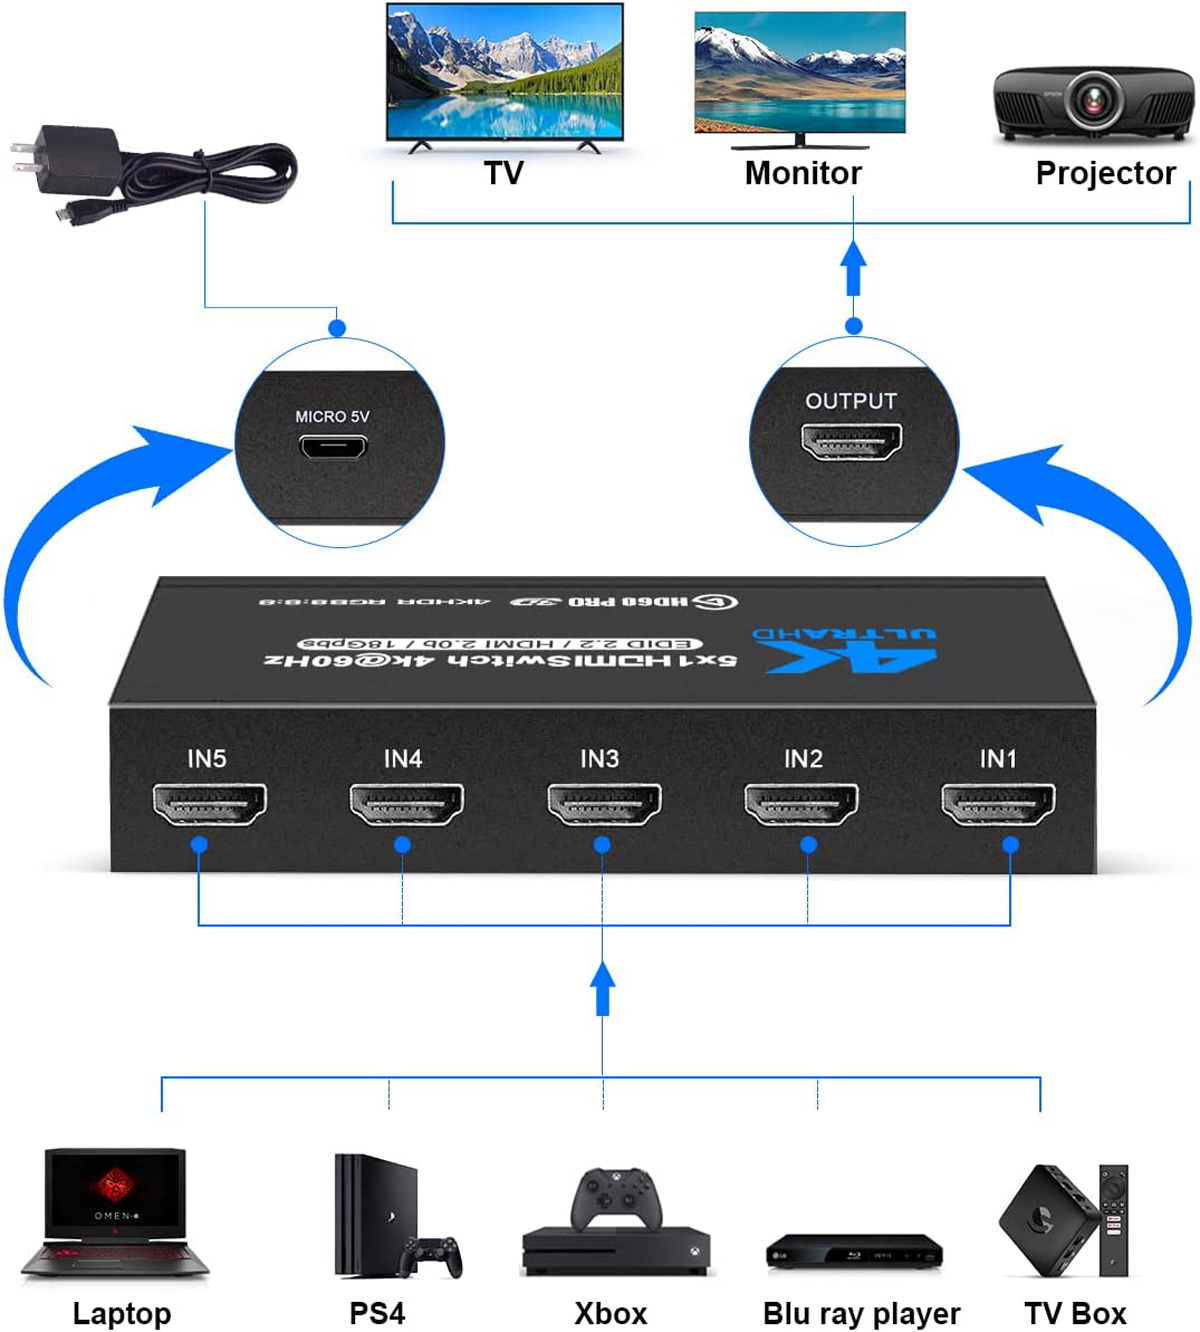 HDMI Switch 5x1 with 4K Support and Remote - Adds 5 HDMI Ports to TV  (400043) - Best Deal in Town Las Vegas